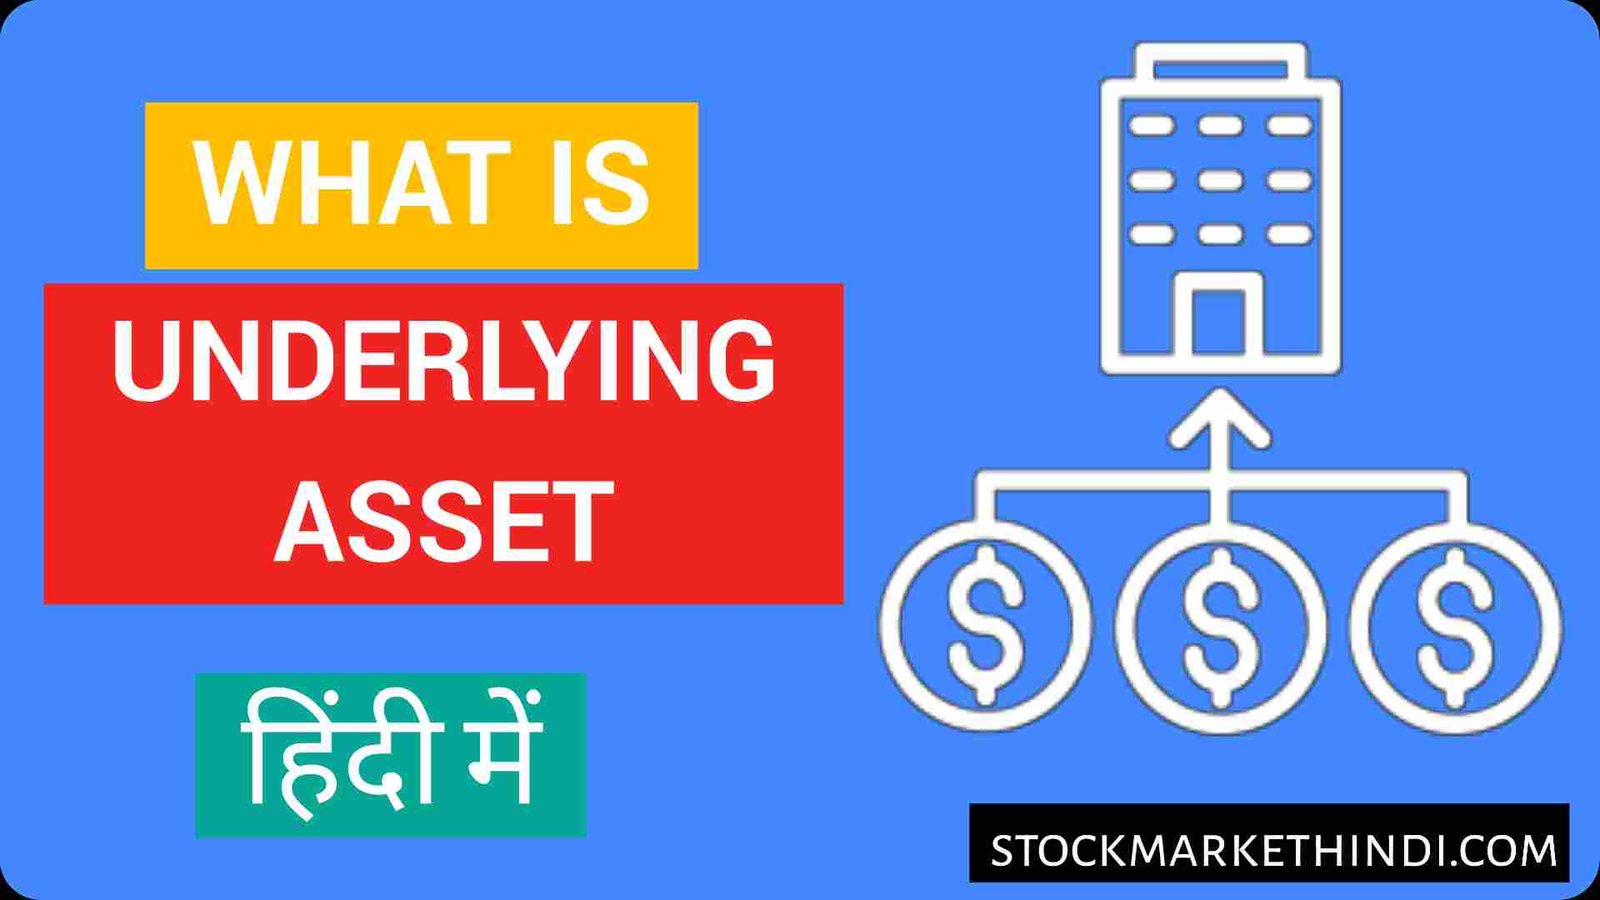 Underlying asset meaning in hindi